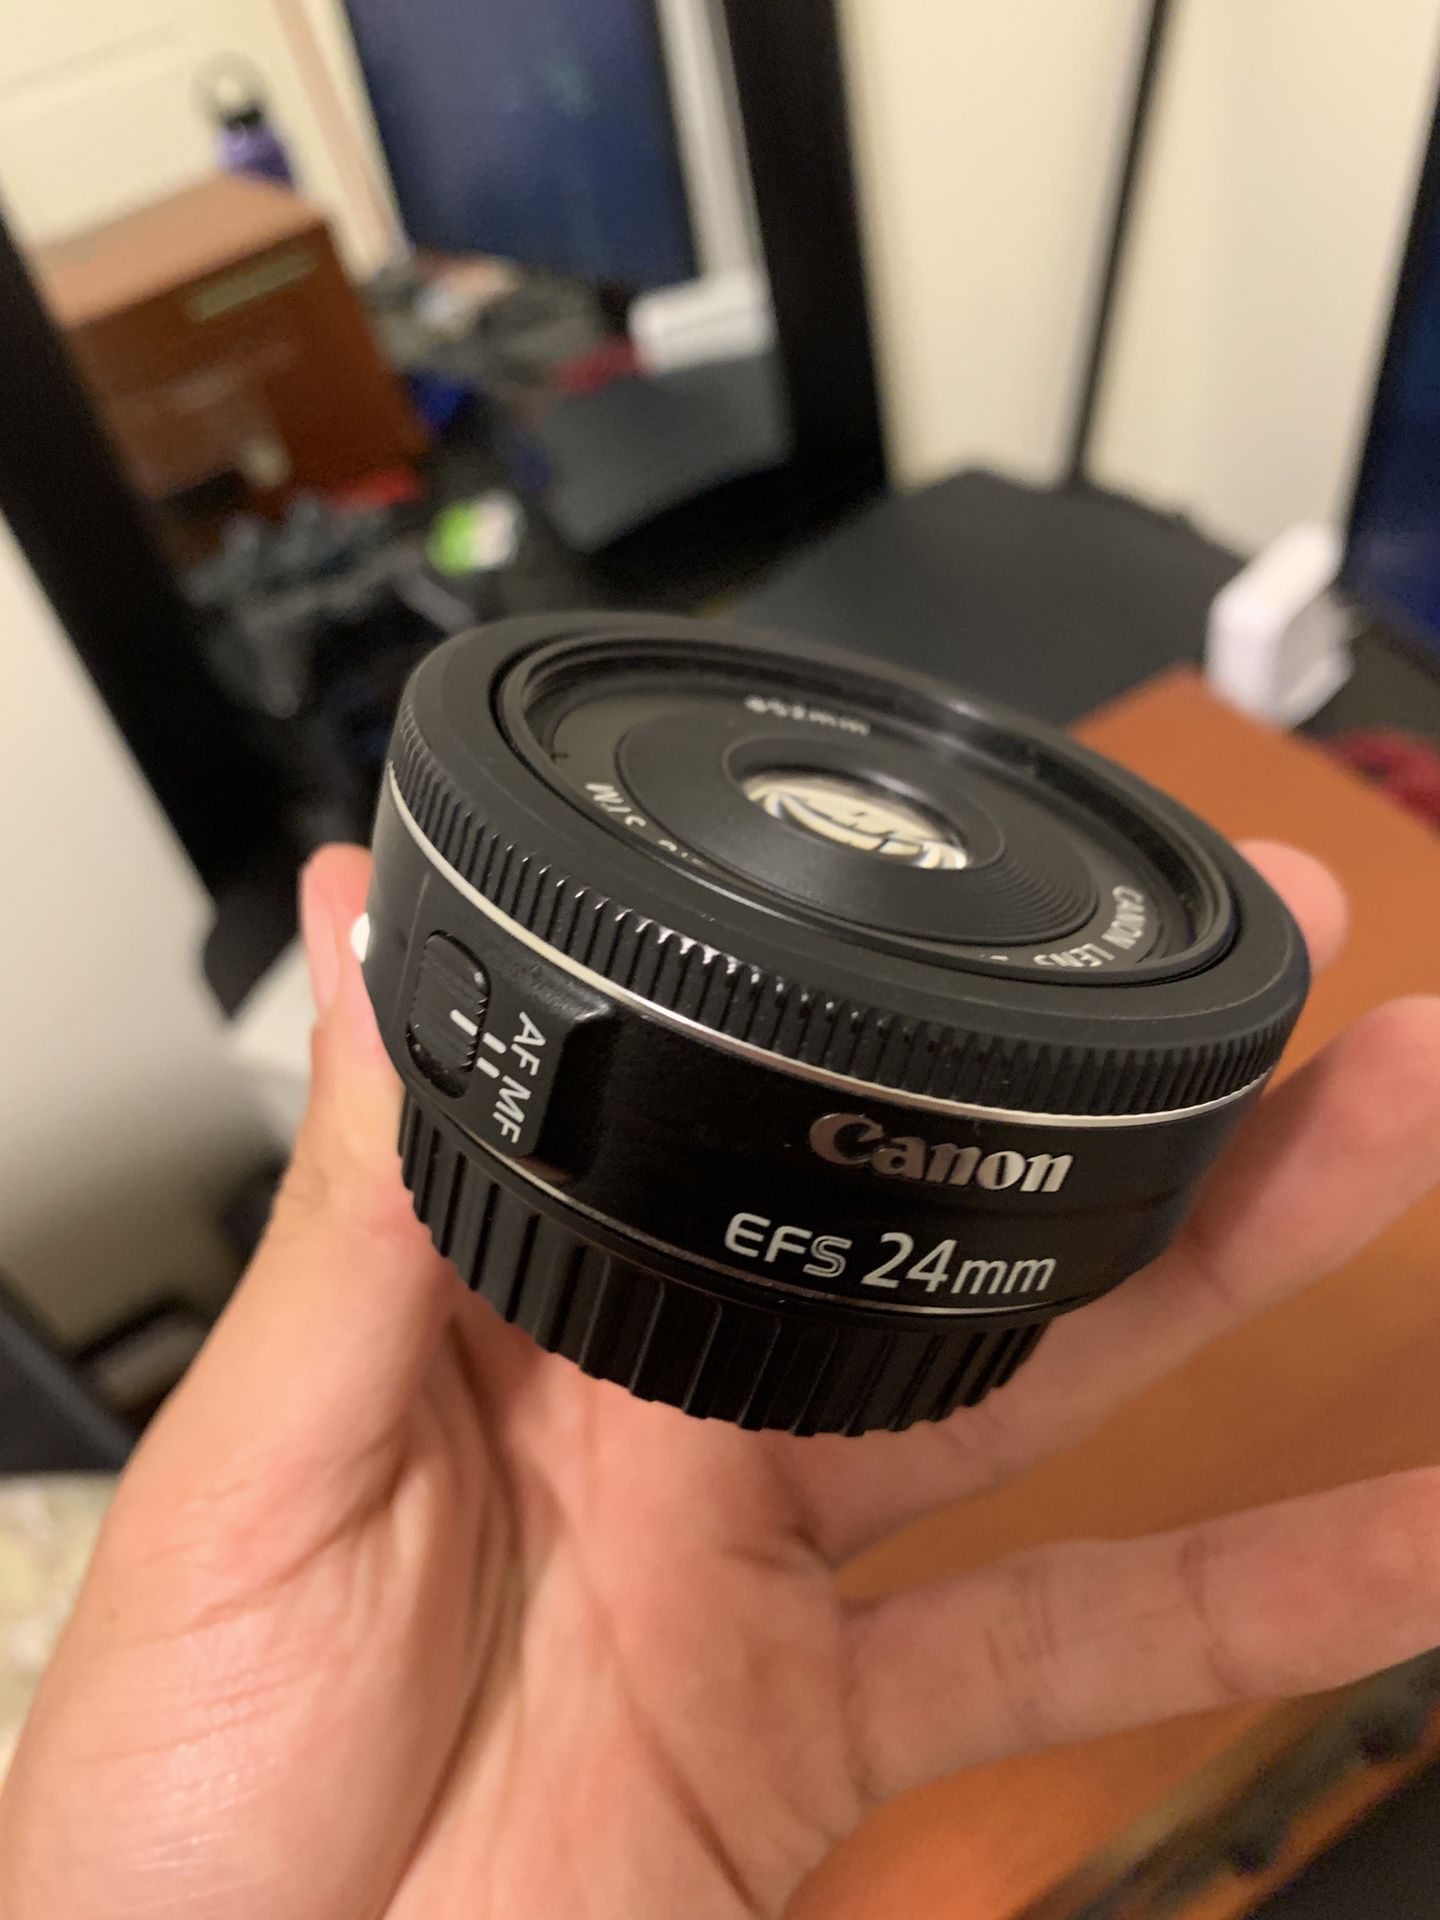 24 mm Canon EFS f 2.4